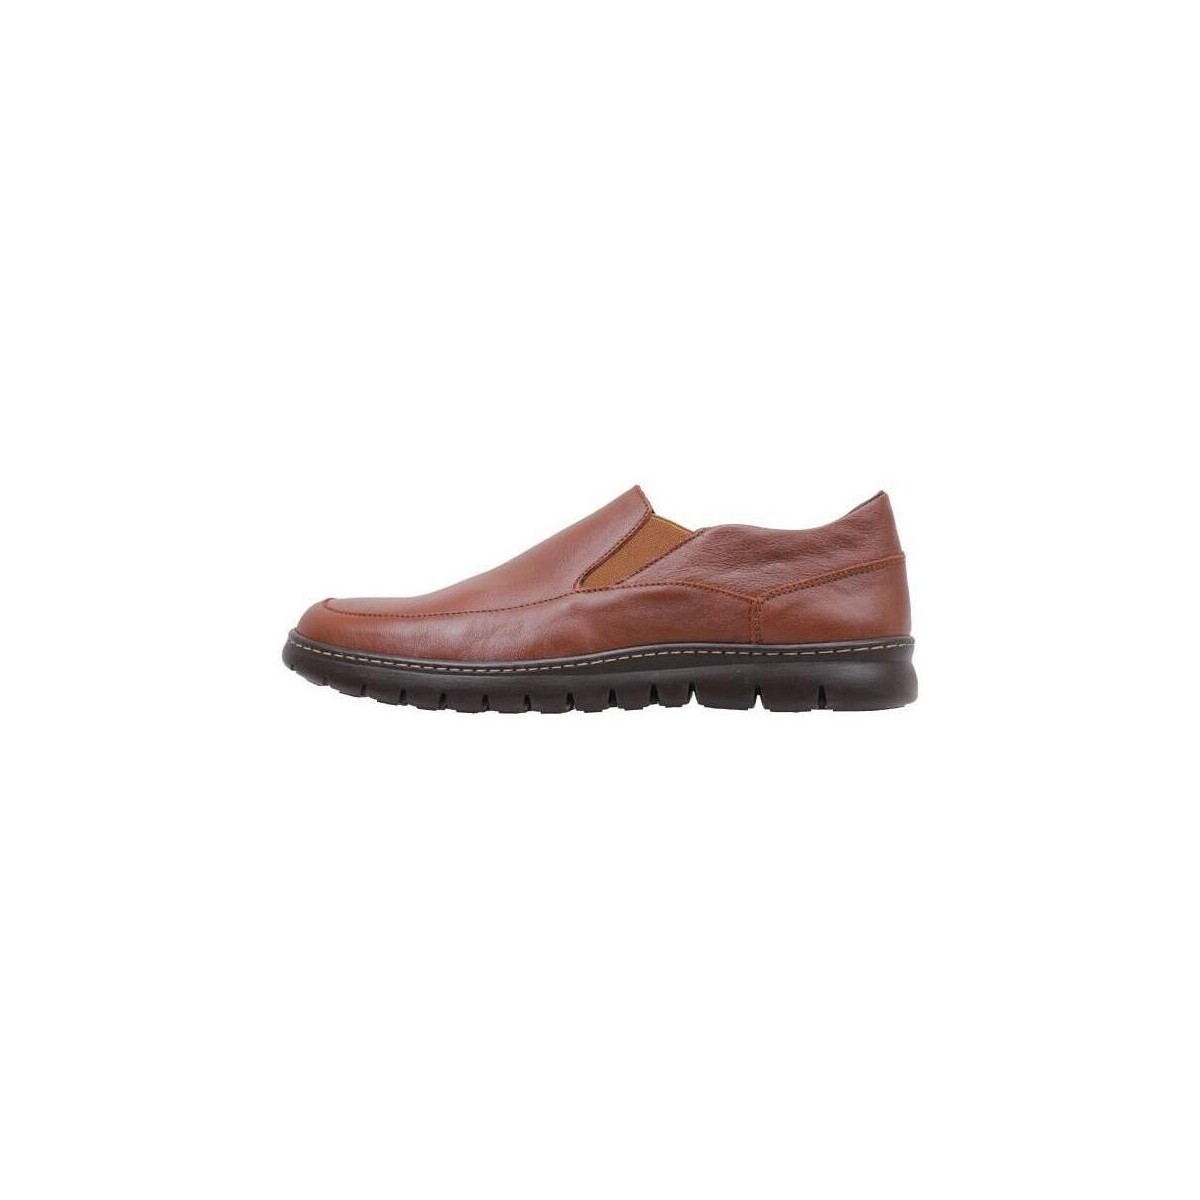 Chaussures Homme Mocassins Cossimo 2201 Marron